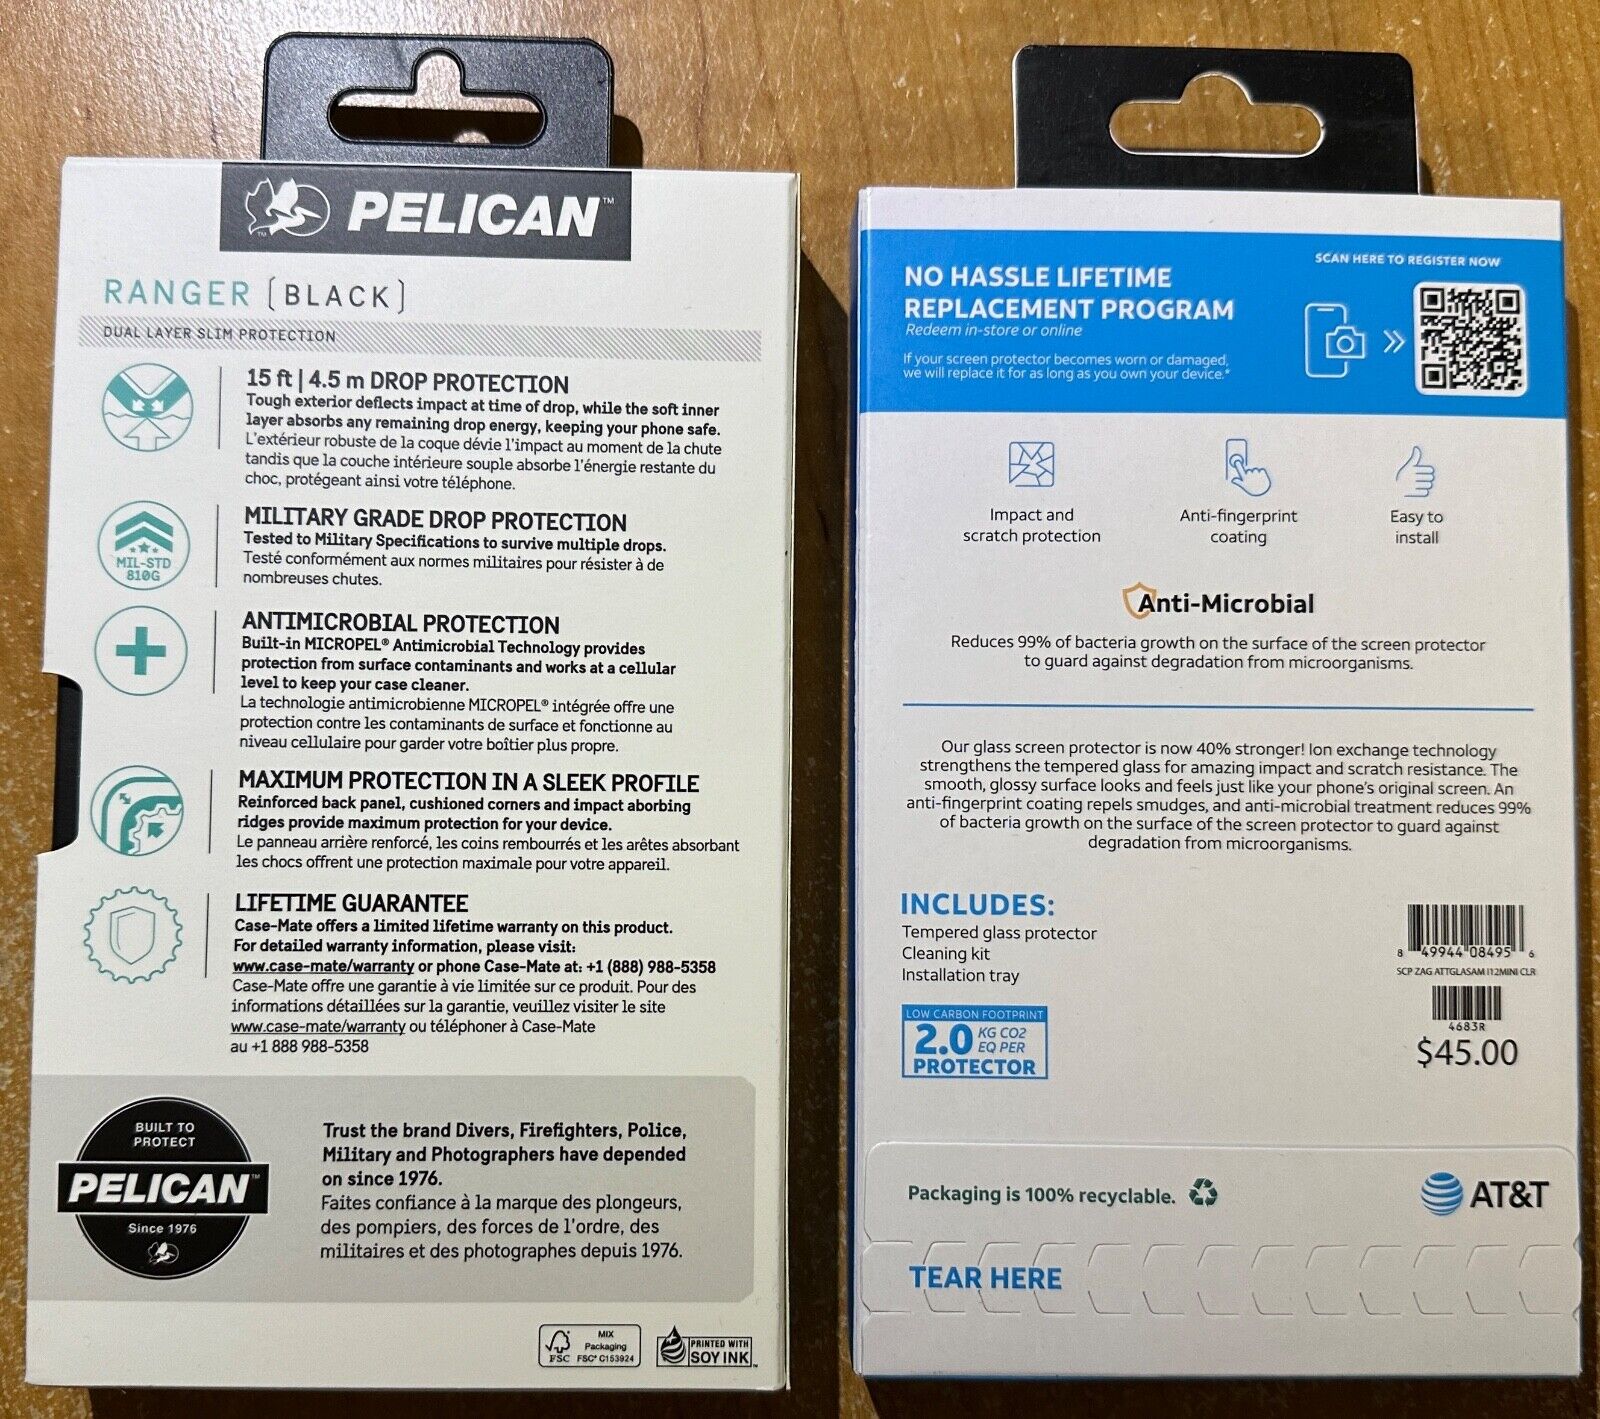 Pelican Ranger Slim Case & AT&T Glass Screen Protector for iPhone 12 Mini (5.4